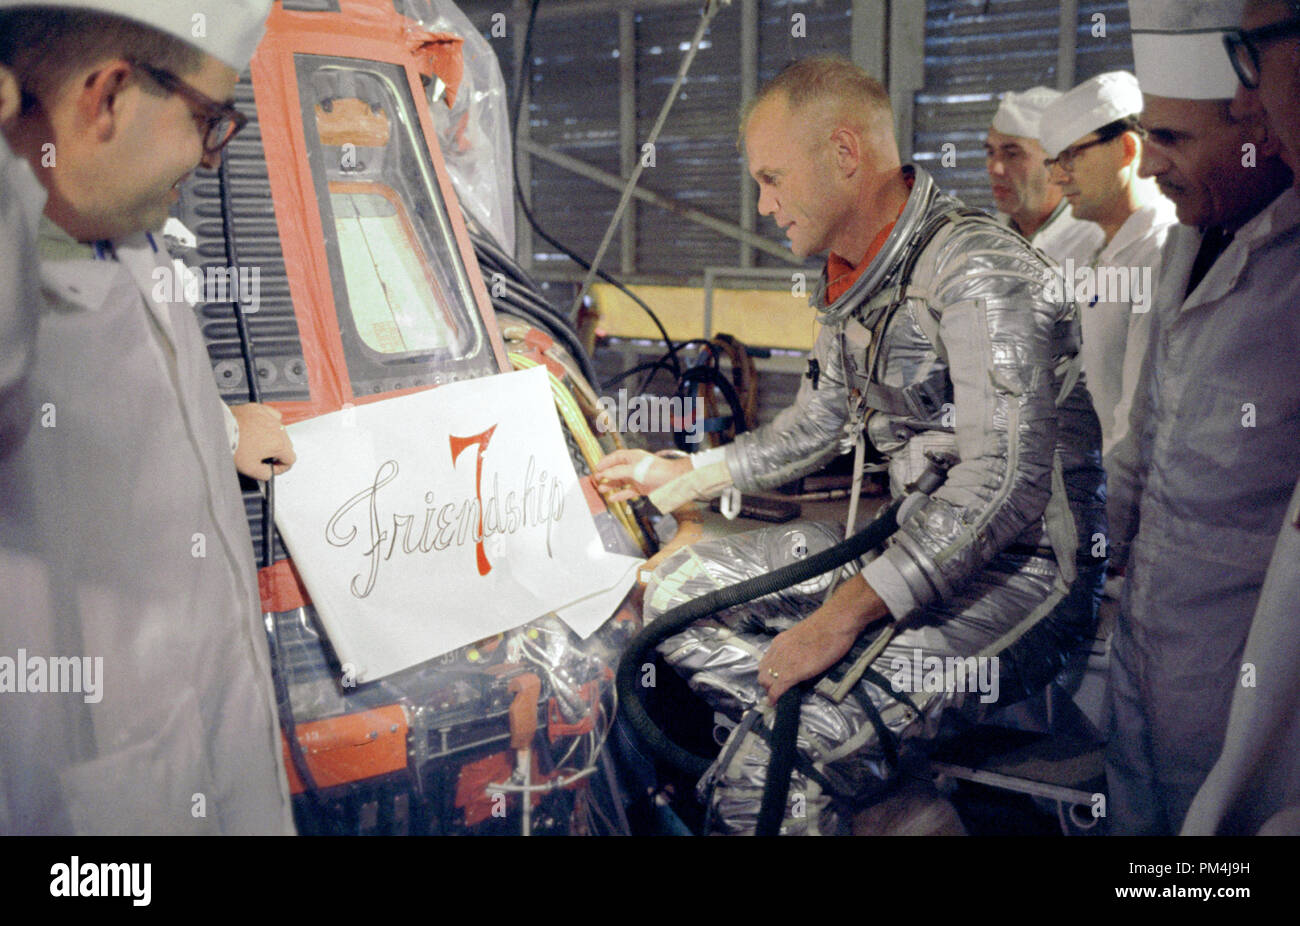 Astronaut John Glenn inspects artwork that will be painted on the outside of his Mercury spacecraft, which he nicknamed Friendship 7. On Feb. 20, 1962, Glenn lifted off into space aboard his Mercury Atlas (MA-6) rocket to become the first American to orbit the Earth. After orbiting the Earth 3 times, Friendship 7 landed in the Atlantic Ocean, just East of Grand Turk Island in the Bahamas. Glenn and his capsule were recovered by the Navy Destroyer Noa, 21 minutes after splashdown  File Reference # 1003 623THA Stock Photo